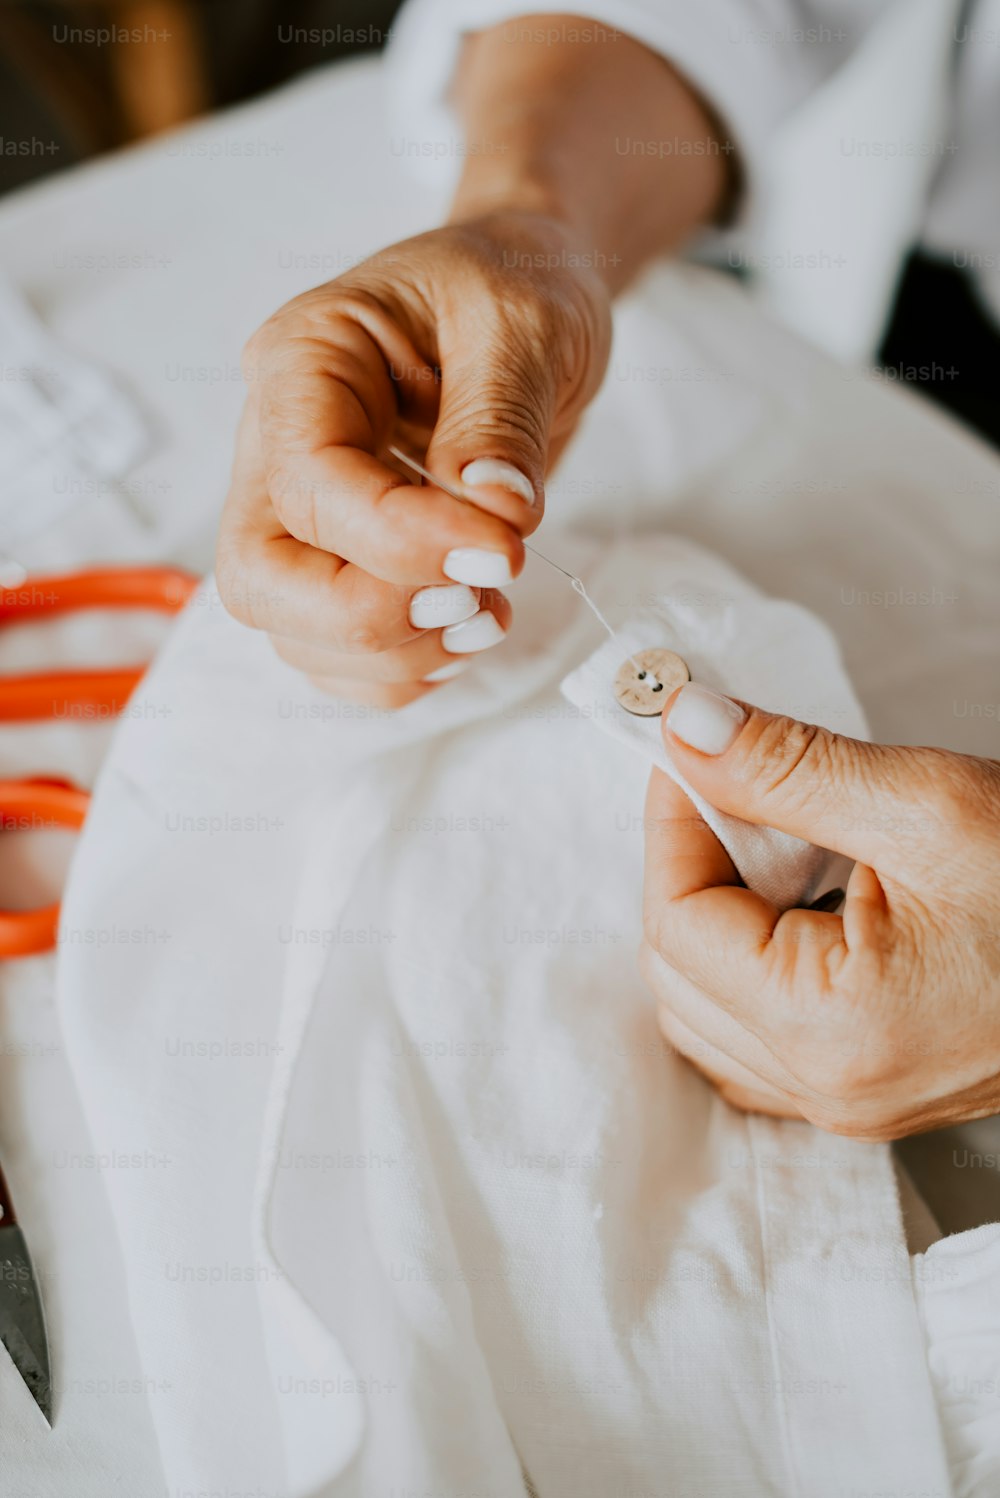 a person is sewing on a white cloth